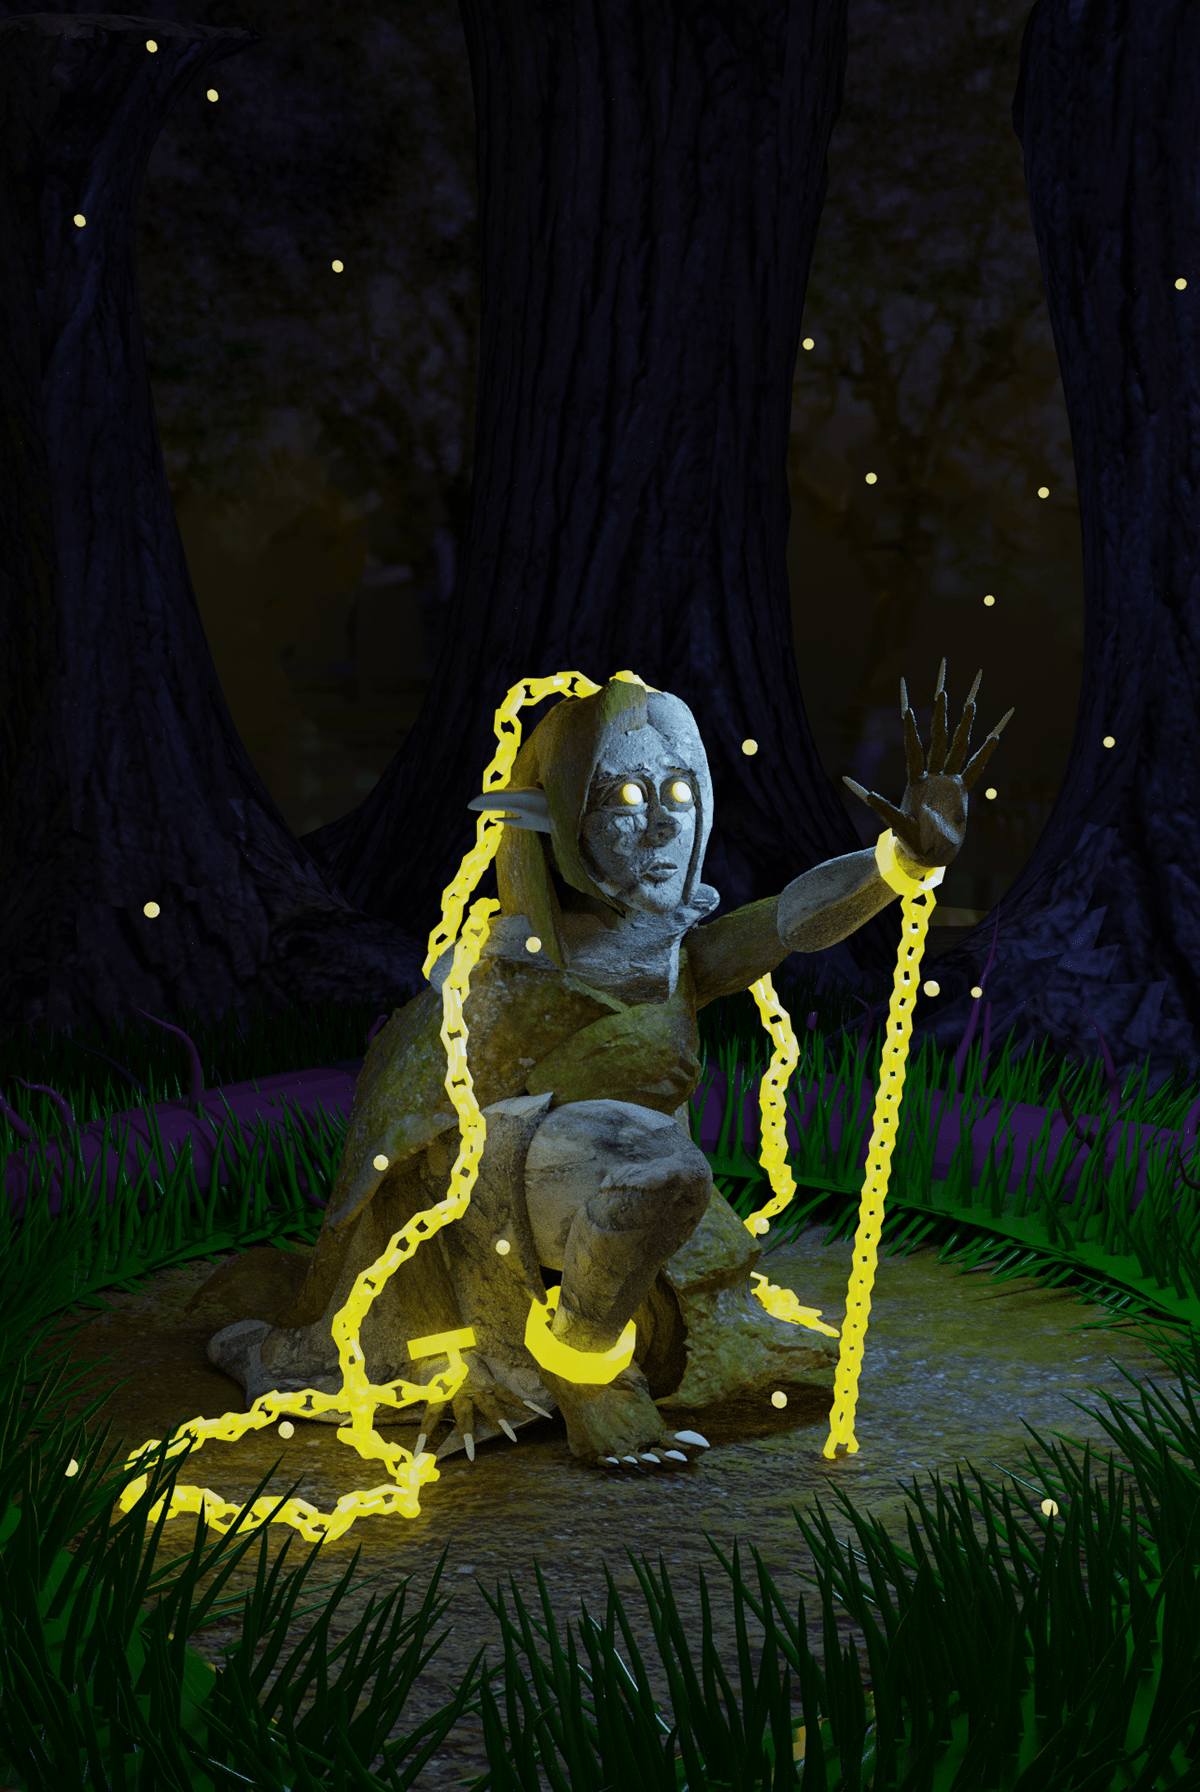 Character design  fantasy art forest ILLUSTRATION  Nature neon lights night photography Outdoor statue woman